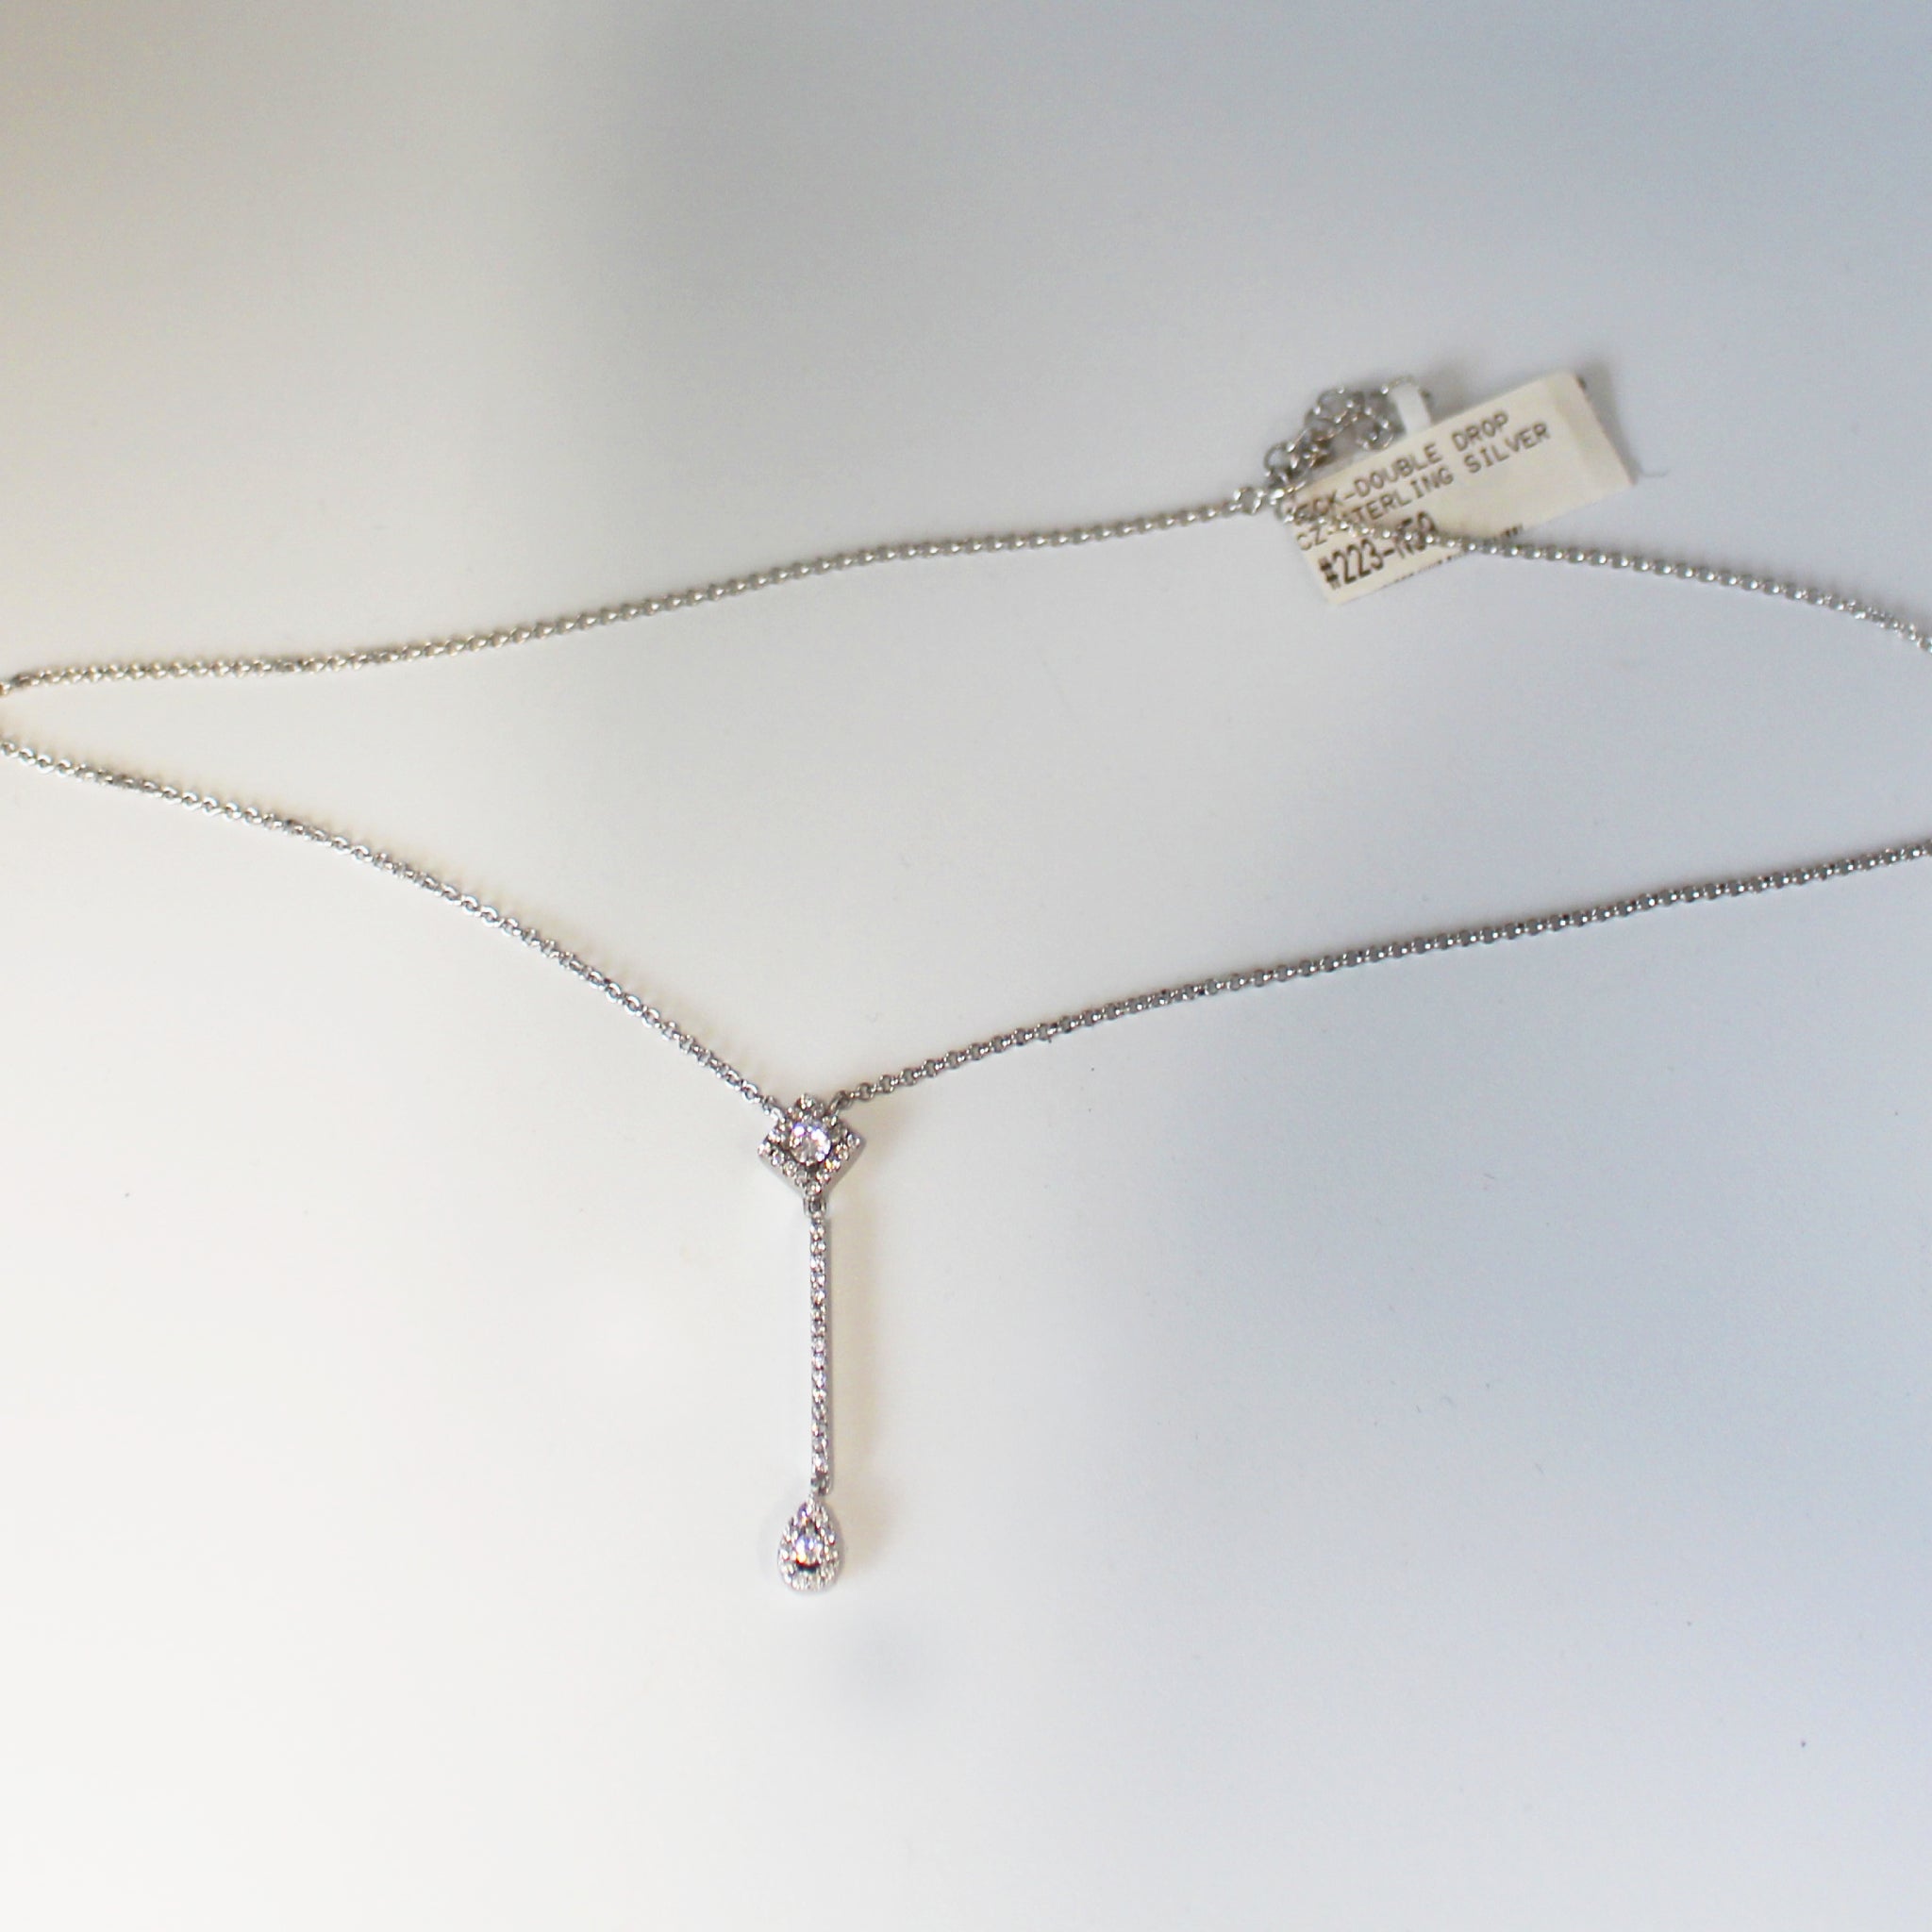 Necklace-Double Drop-CZ- Sterling Silver